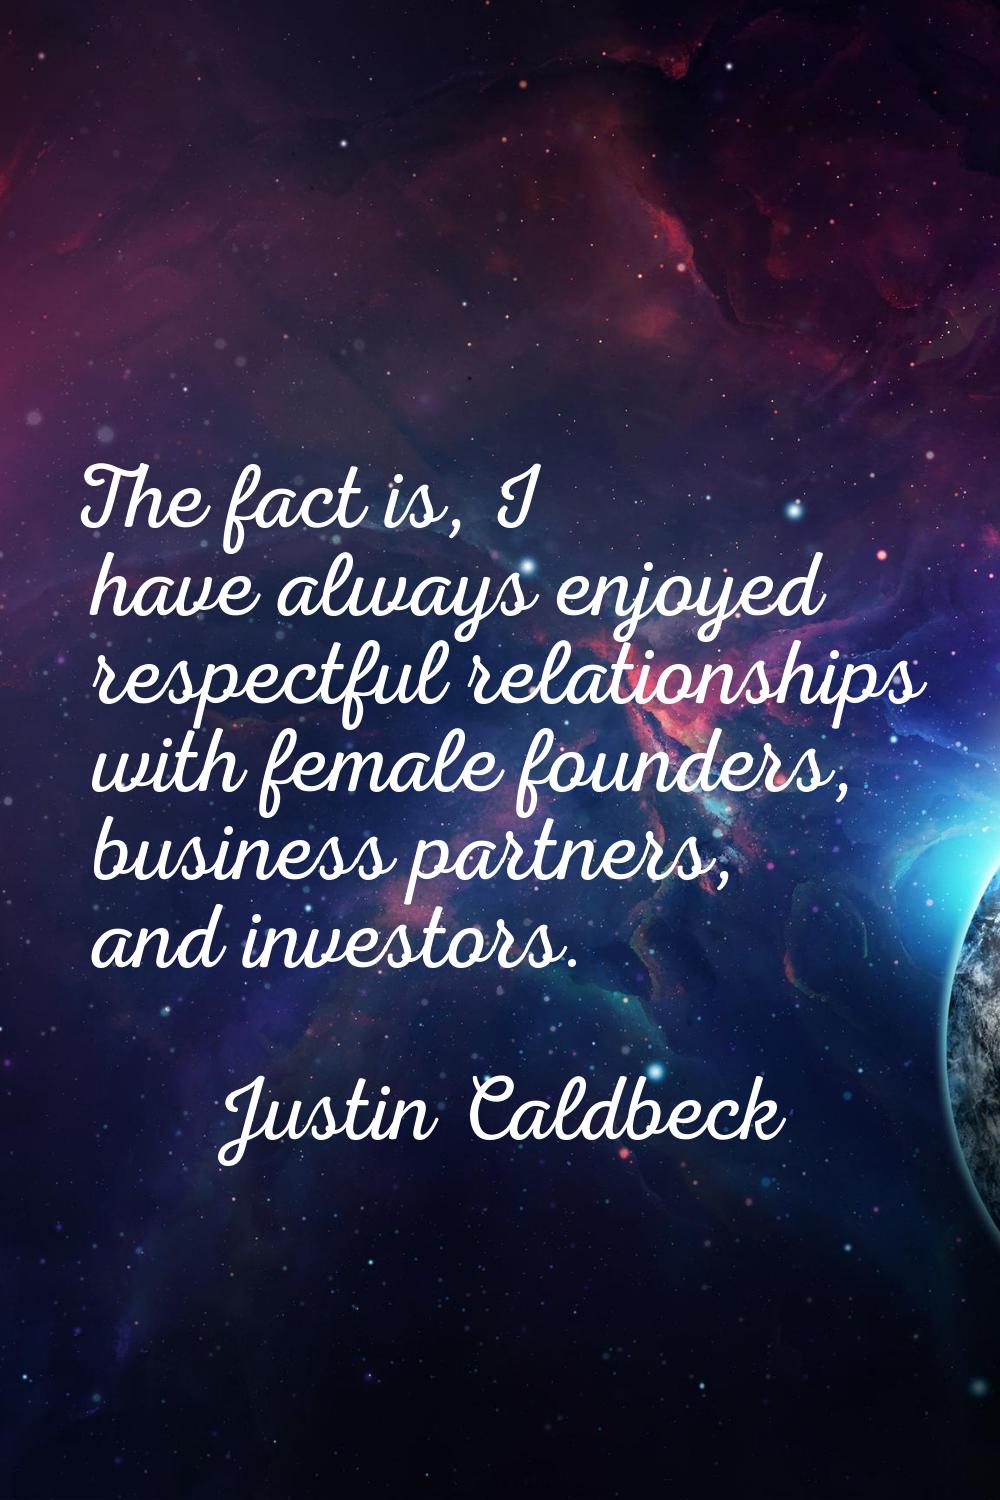 The fact is, I have always enjoyed respectful relationships with female founders, business partners